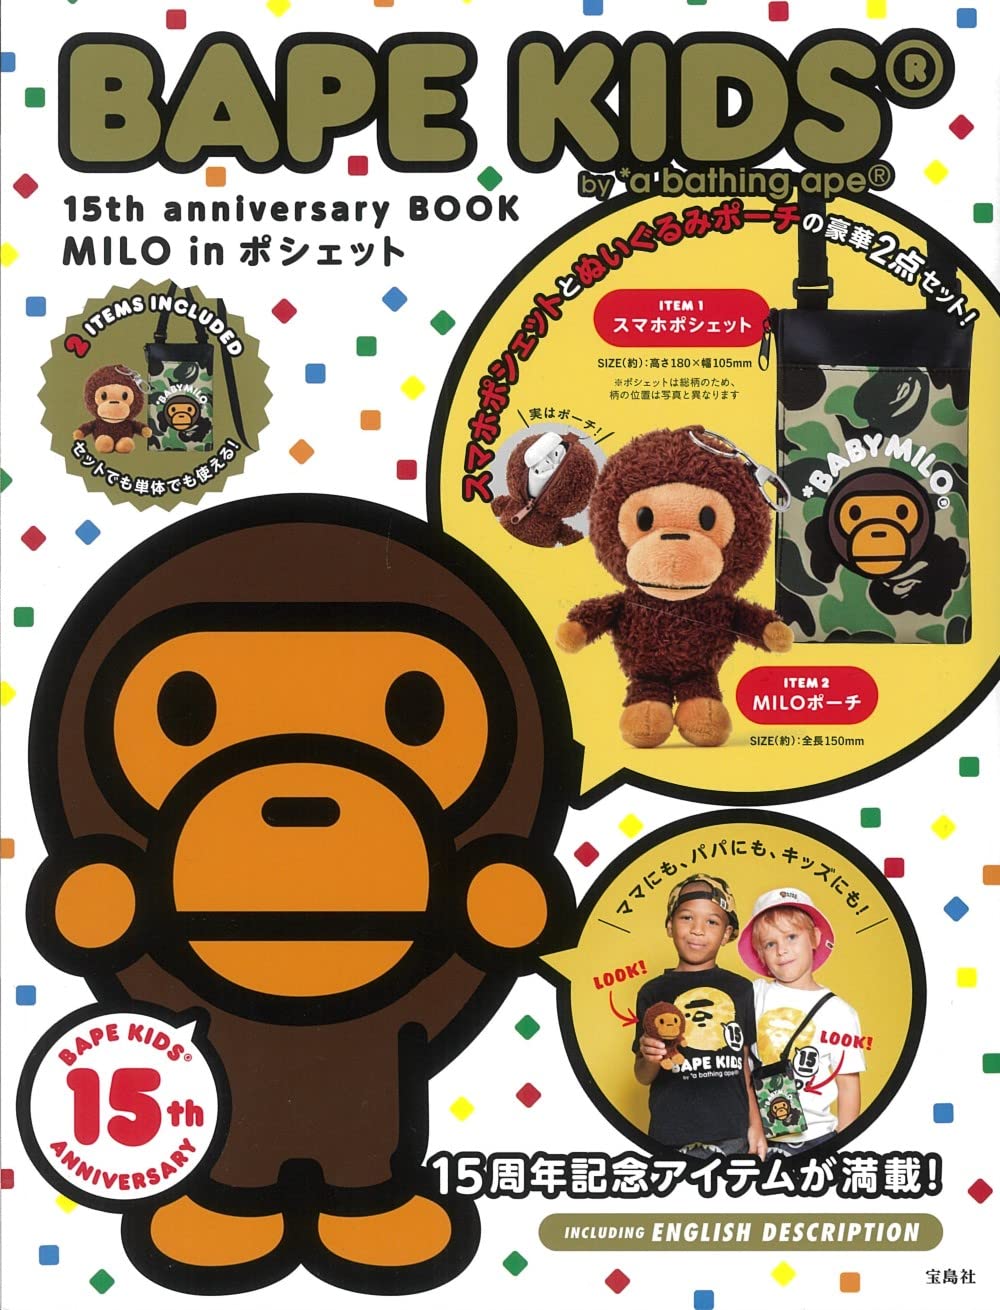 BAPE KIDS® by *a bathing ape® 15th anniversary BOOK MILO in HOUSE